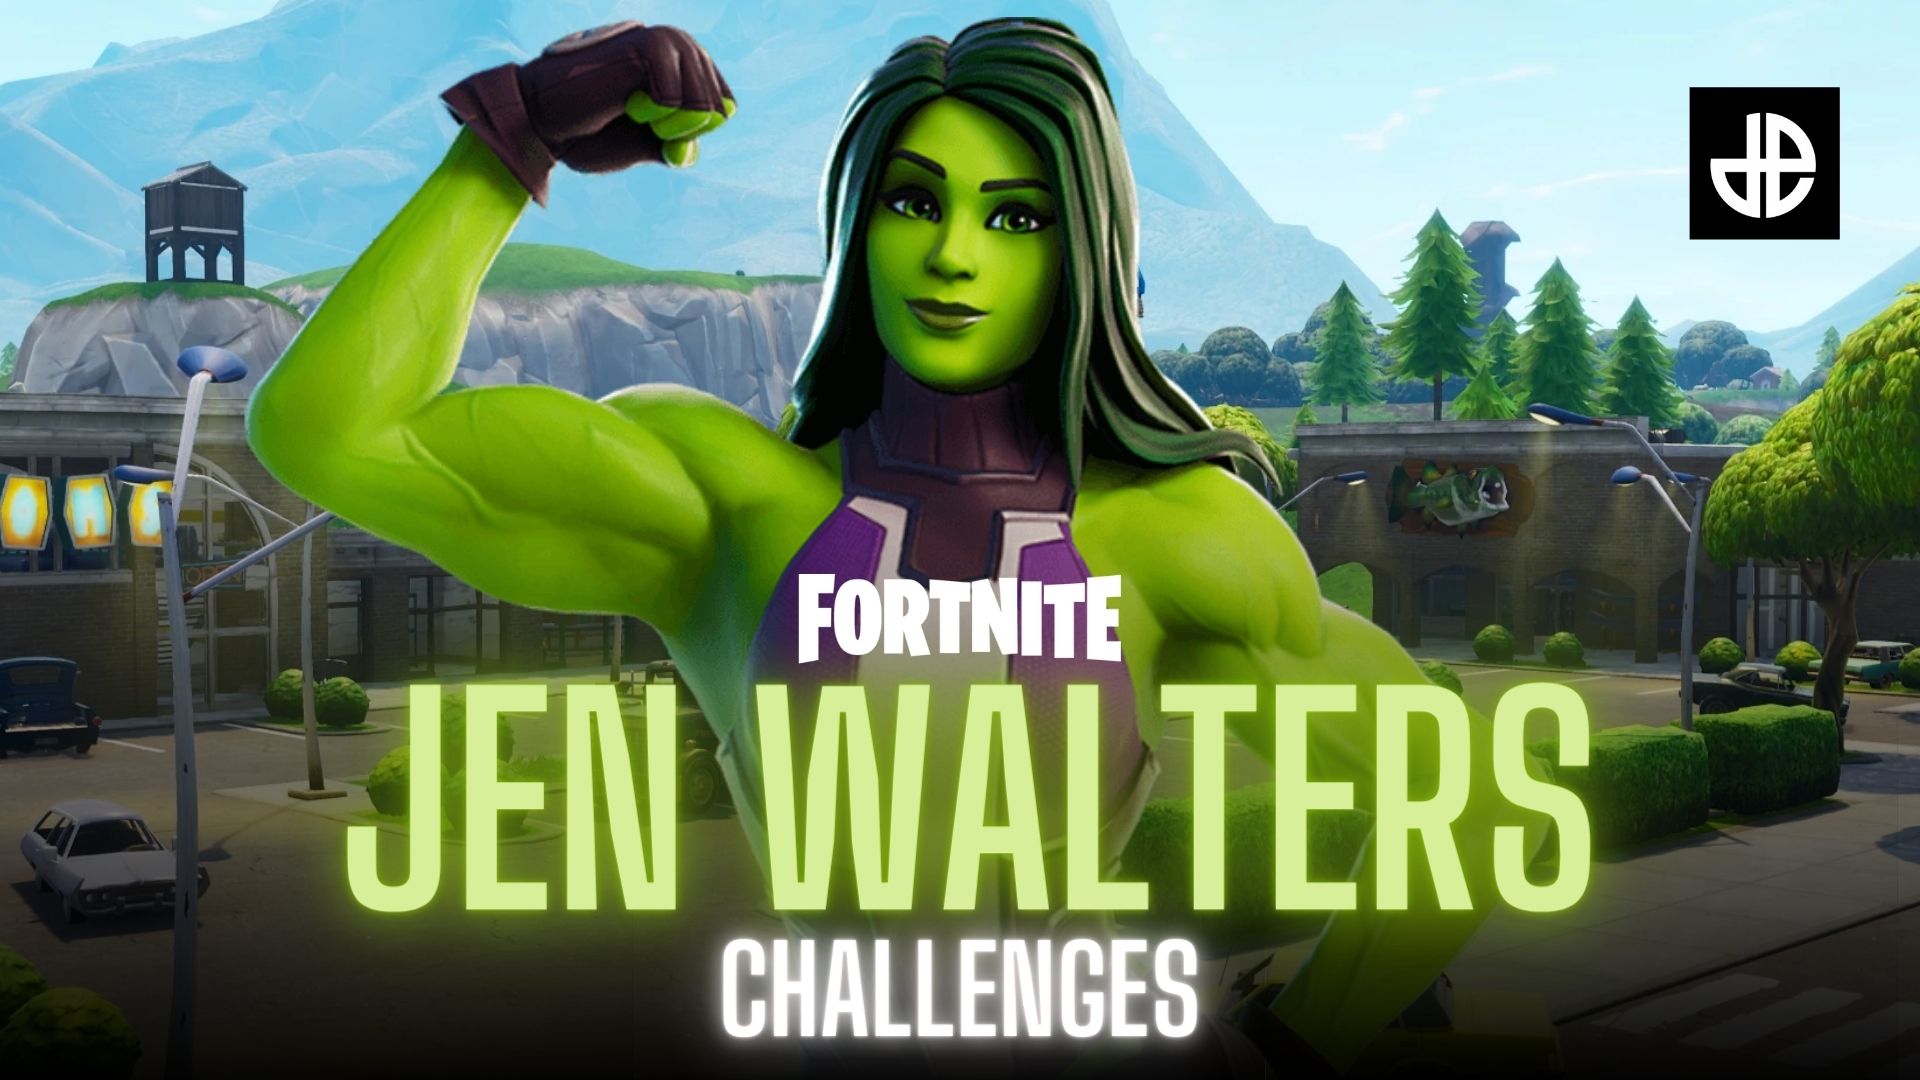 How to complete Jennifer Walters Awakening challenges in Fortnite